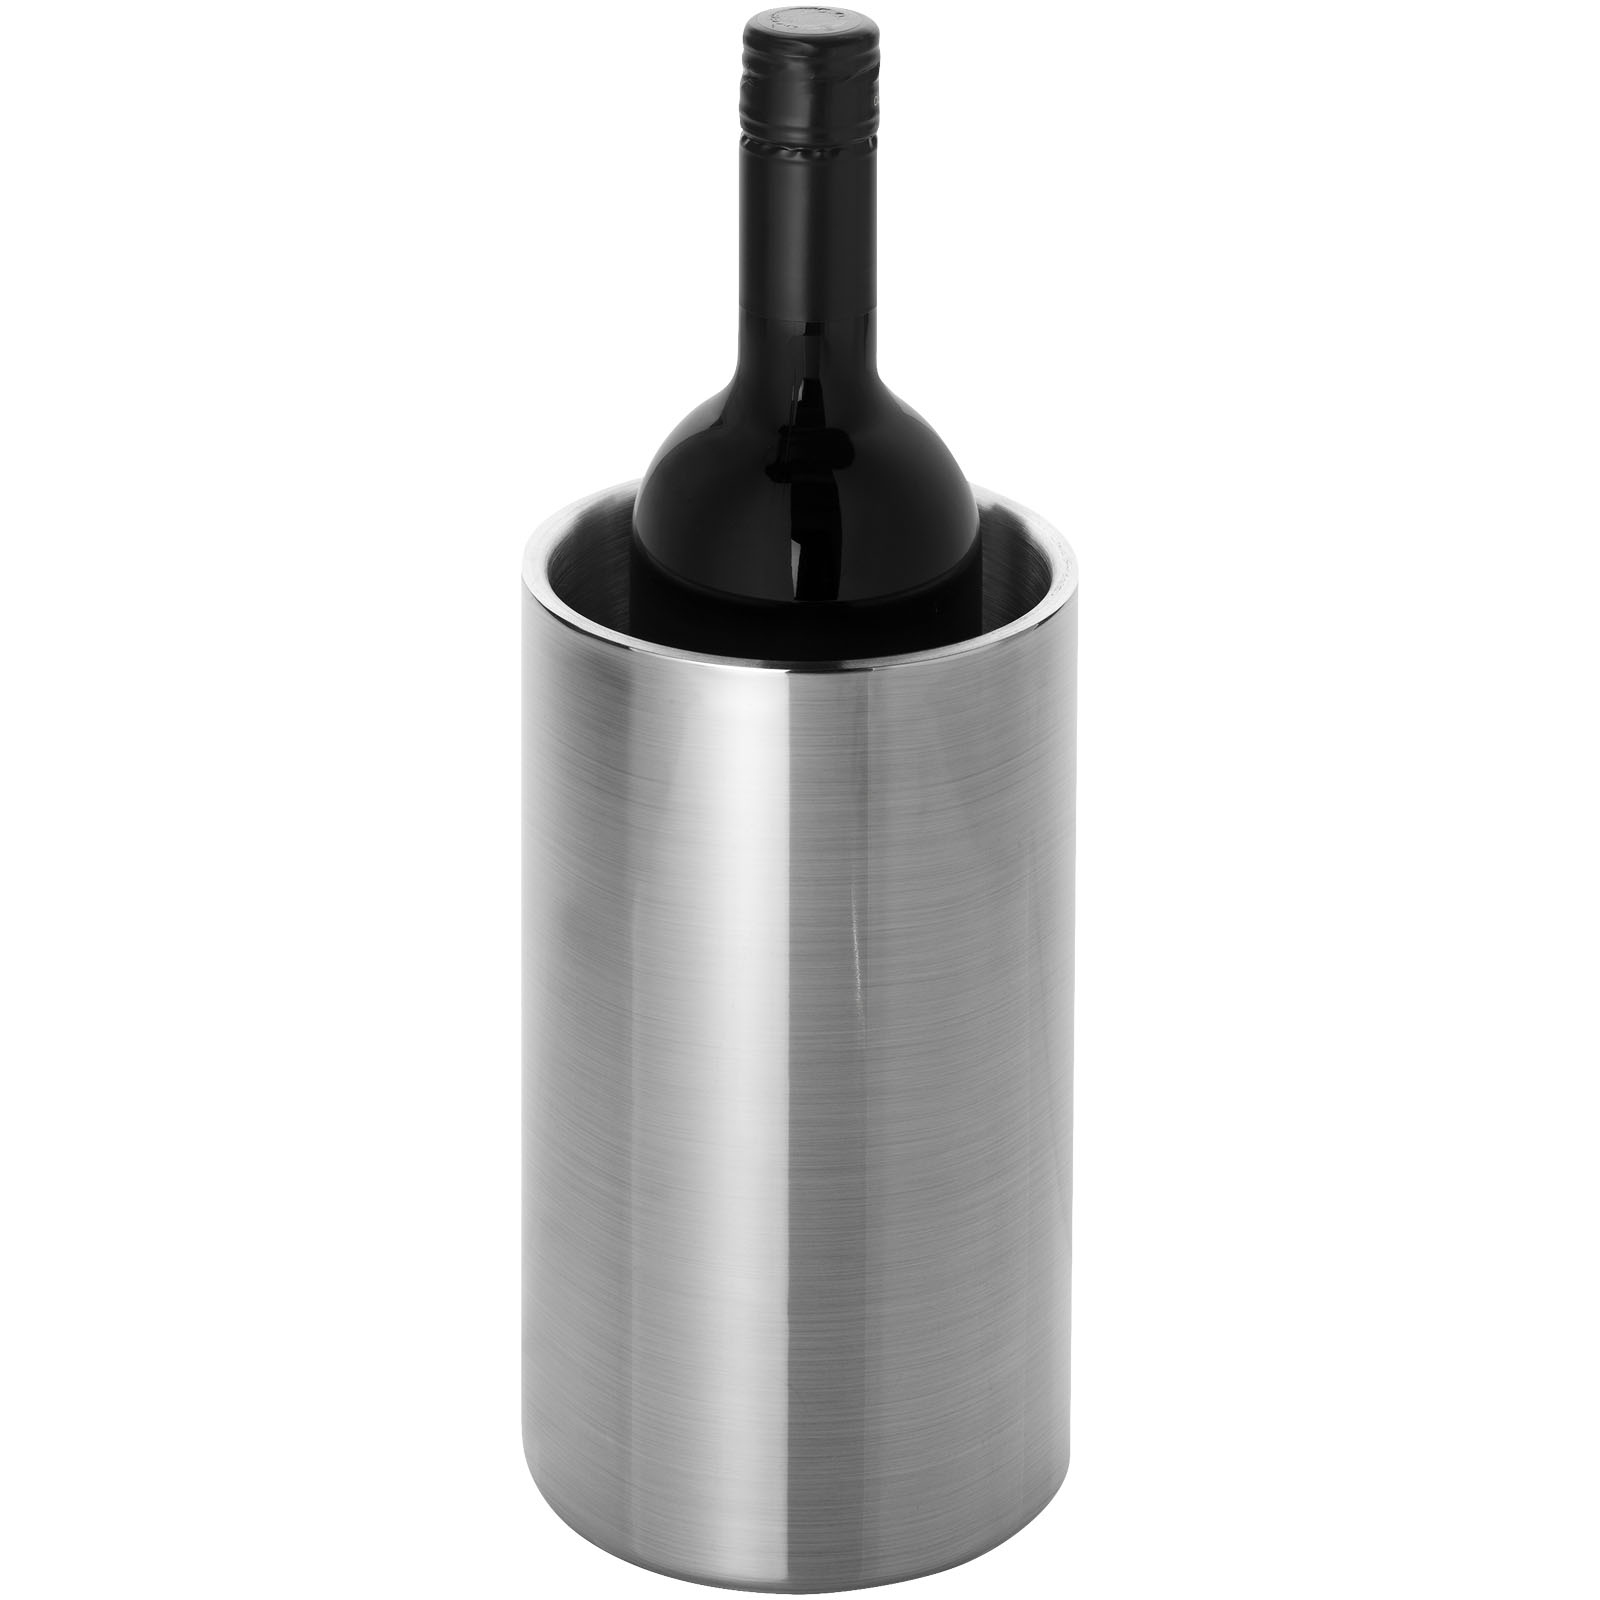 Advertising Wine Accessories - Cielo double-walled stainless steel wine cooler - 0